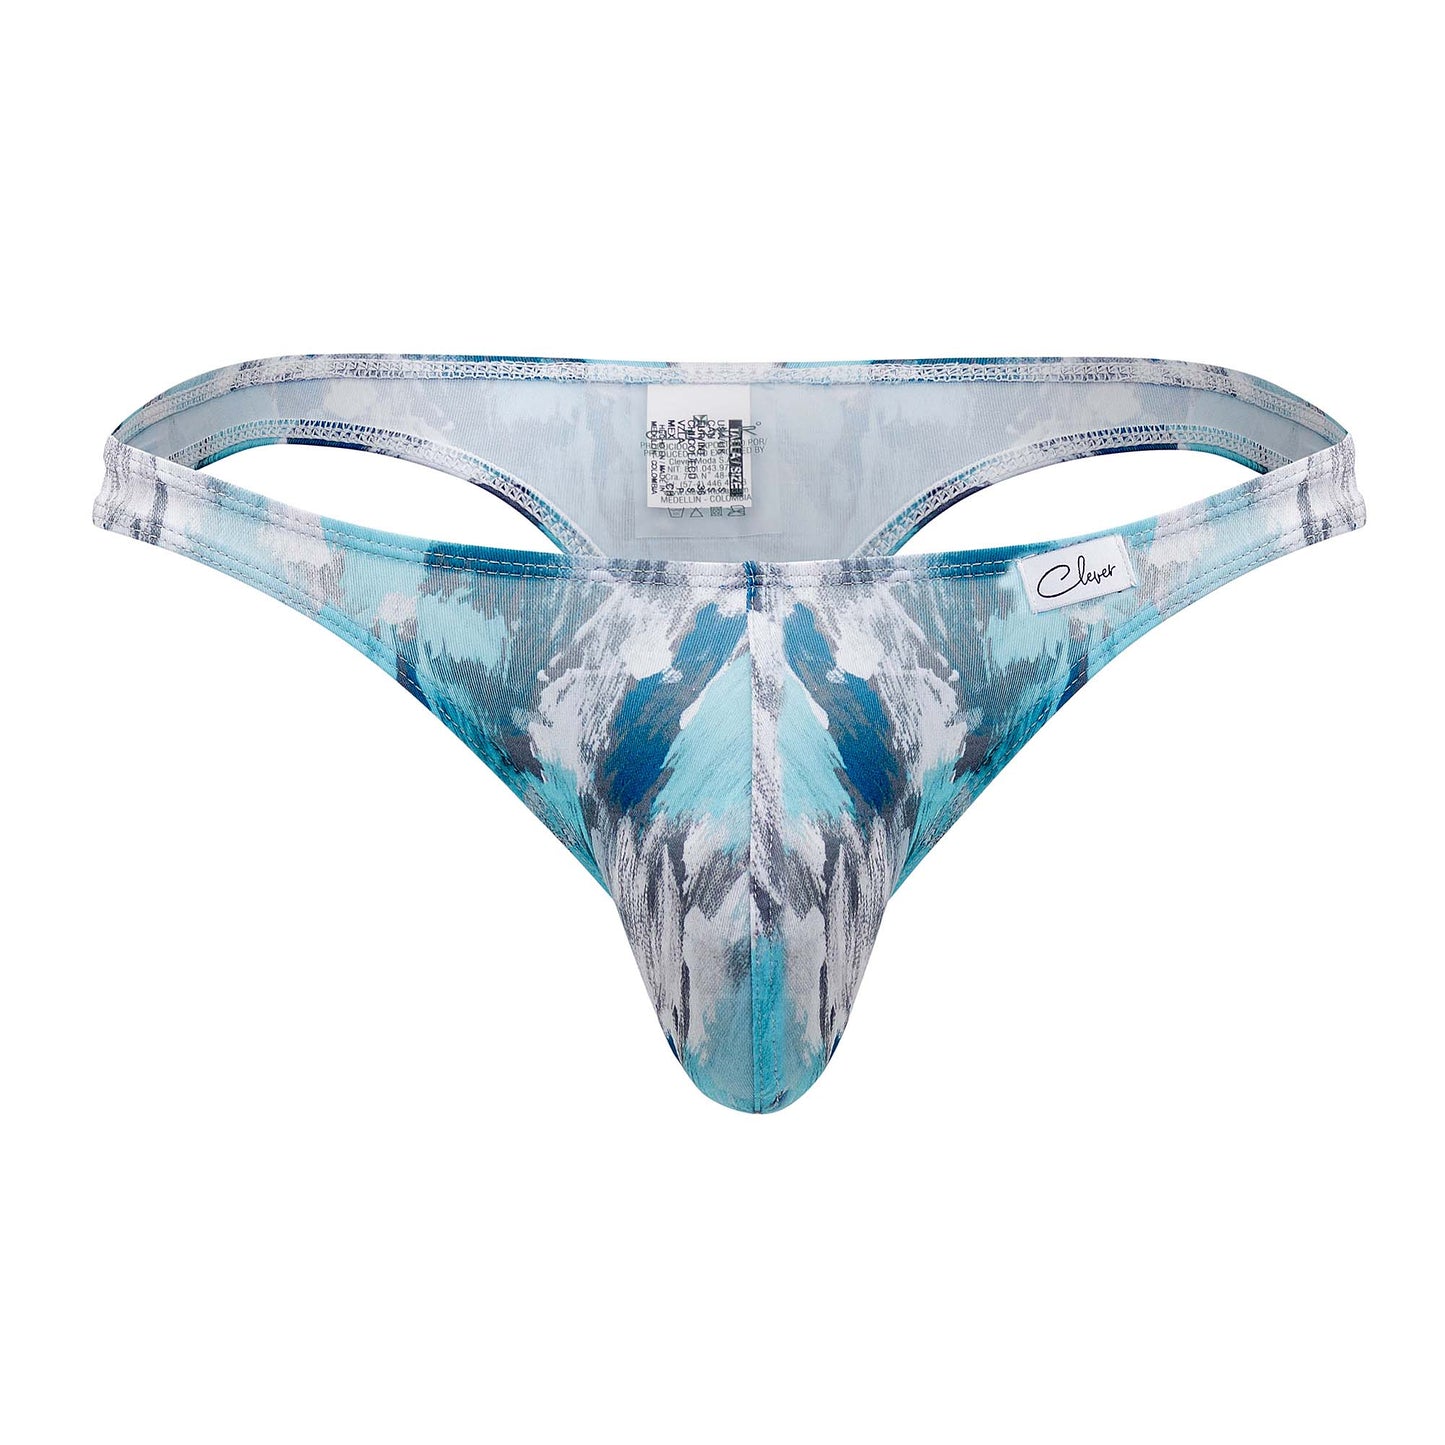 Clever 0932 Art Thongs